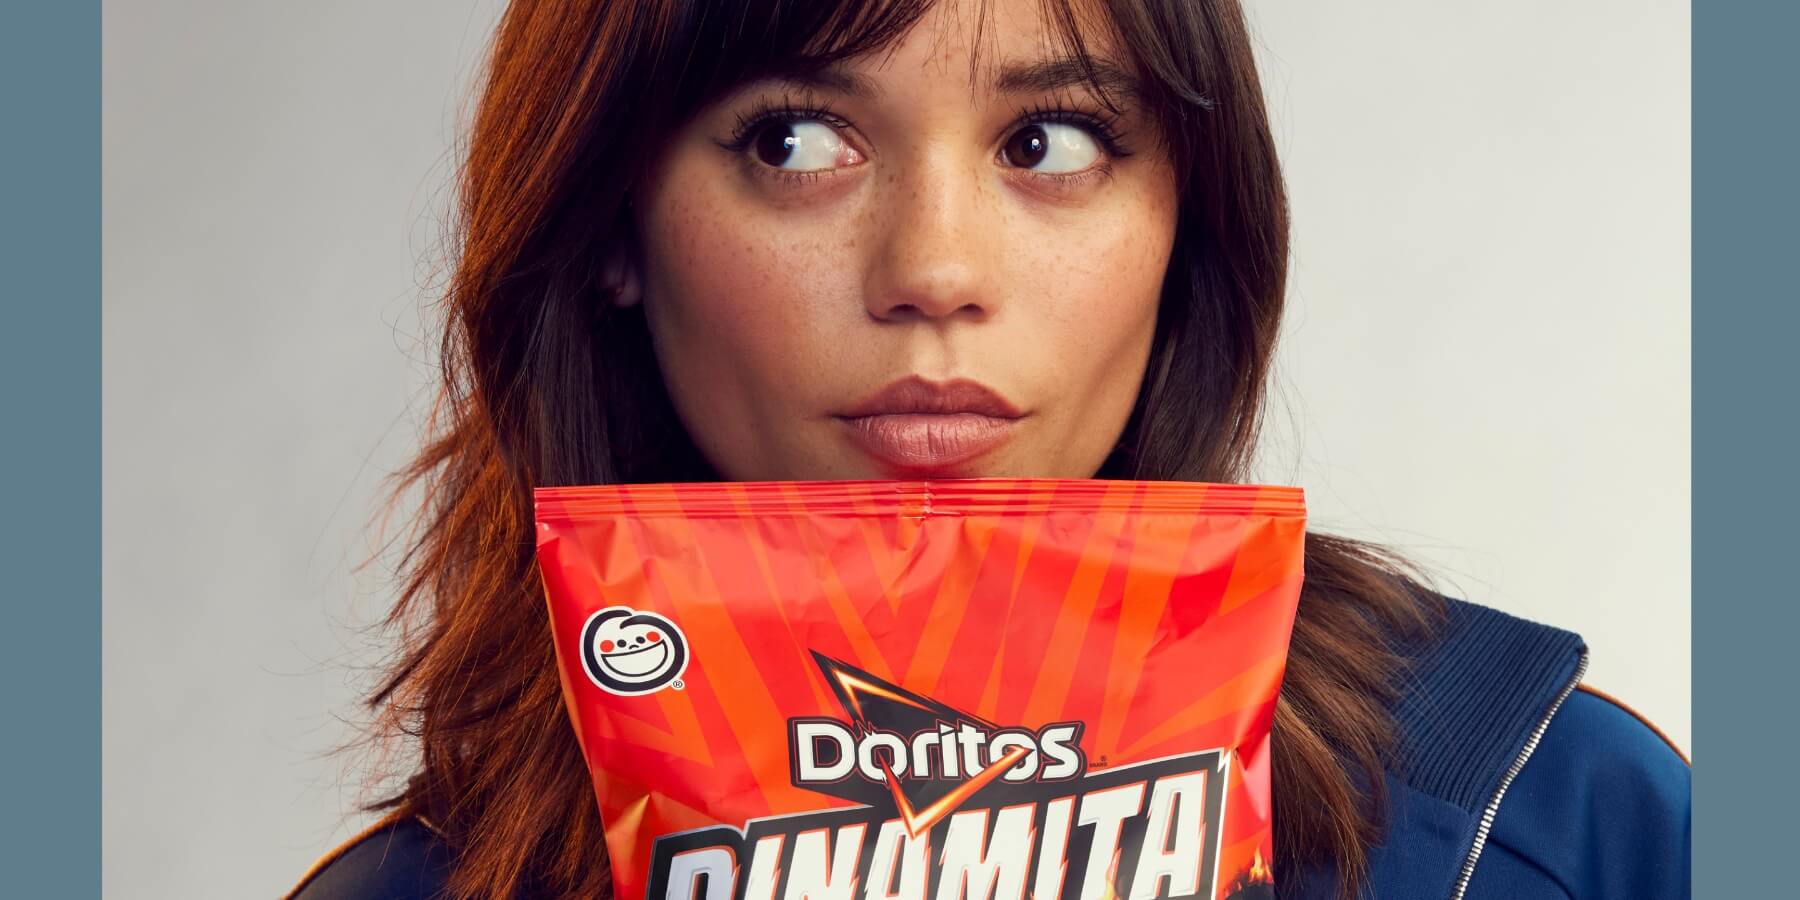 Jenna Ortega is hunting for Doritos in a new Super Bowl ad.